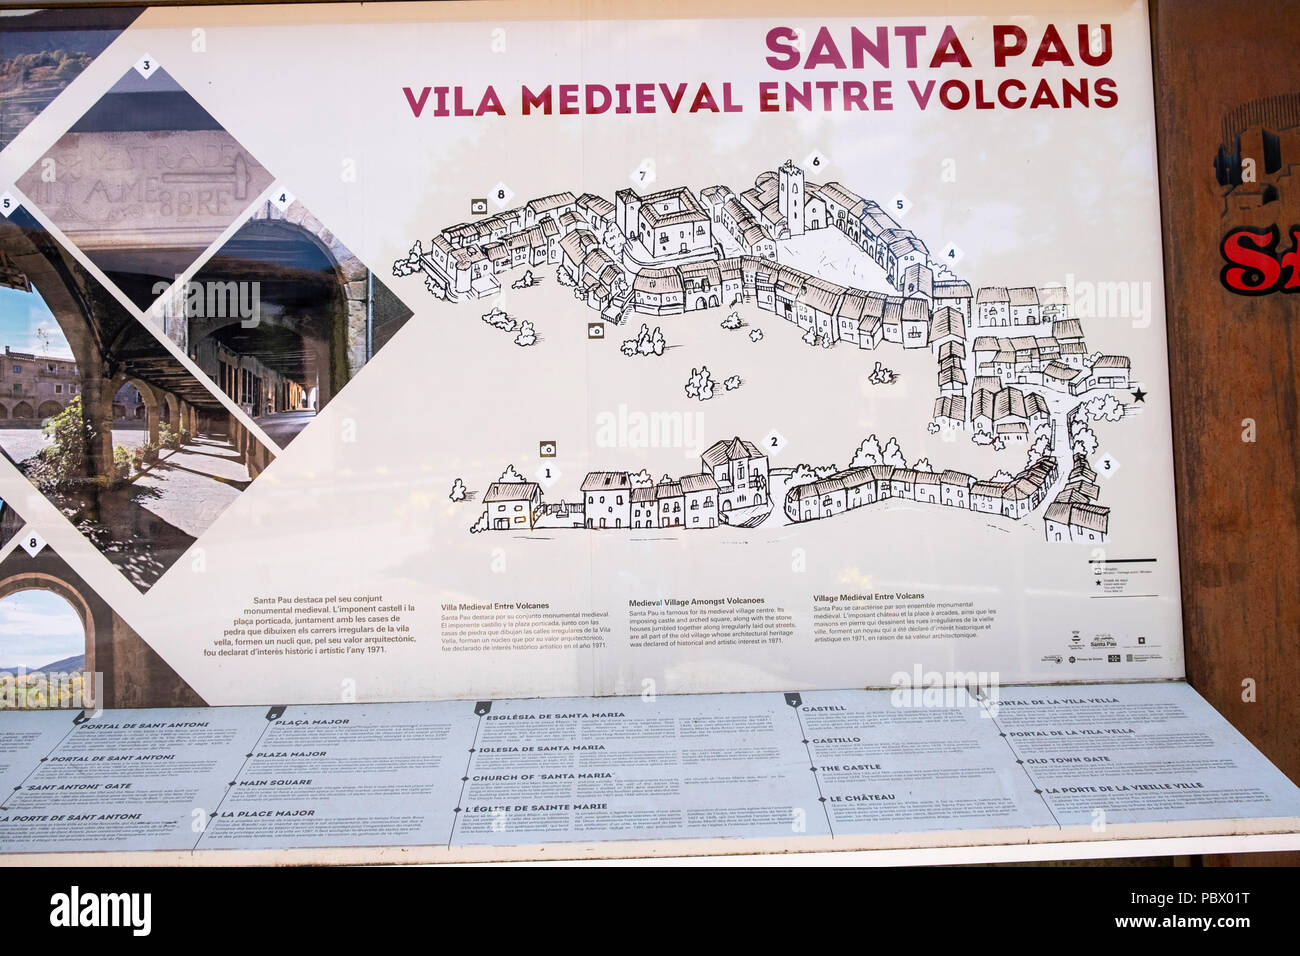 Information boards with plans and drawings of the old medieval center of the village of Santa Pau in the Garrotxa volcanic zone, Catalunya, Spain Stock Photo